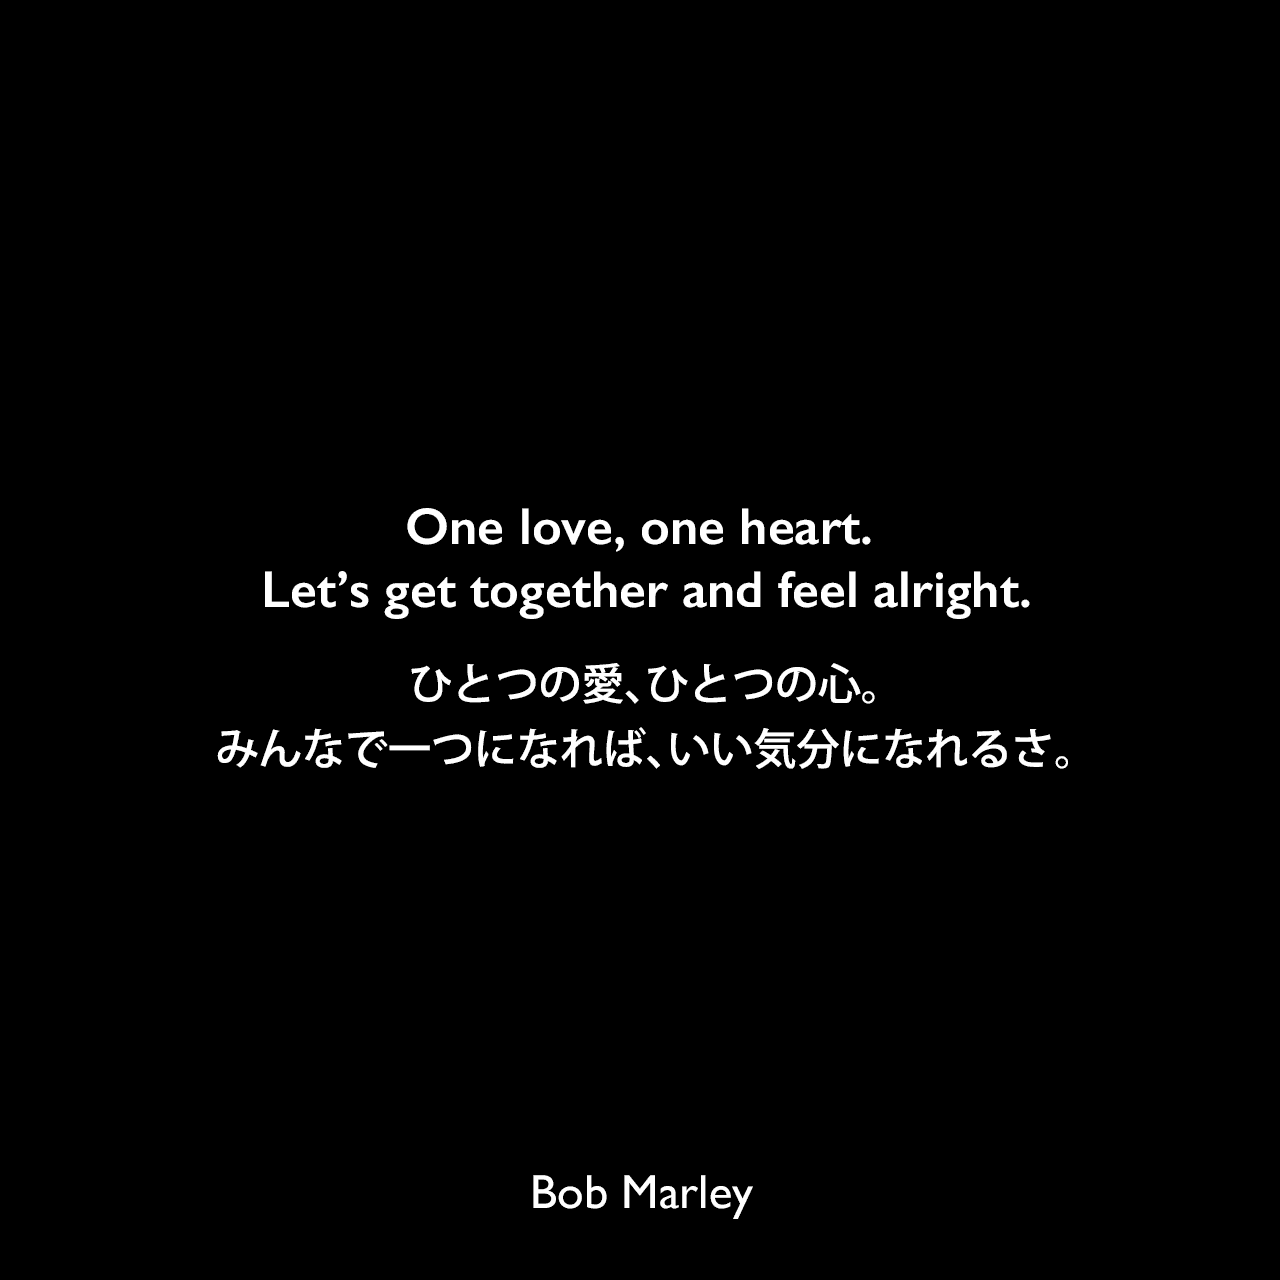 One love, one heart. Let’s get together and feel alright.ひとつの愛、ひとつの心。みんなで一つになれば、いい気分になれるさ。